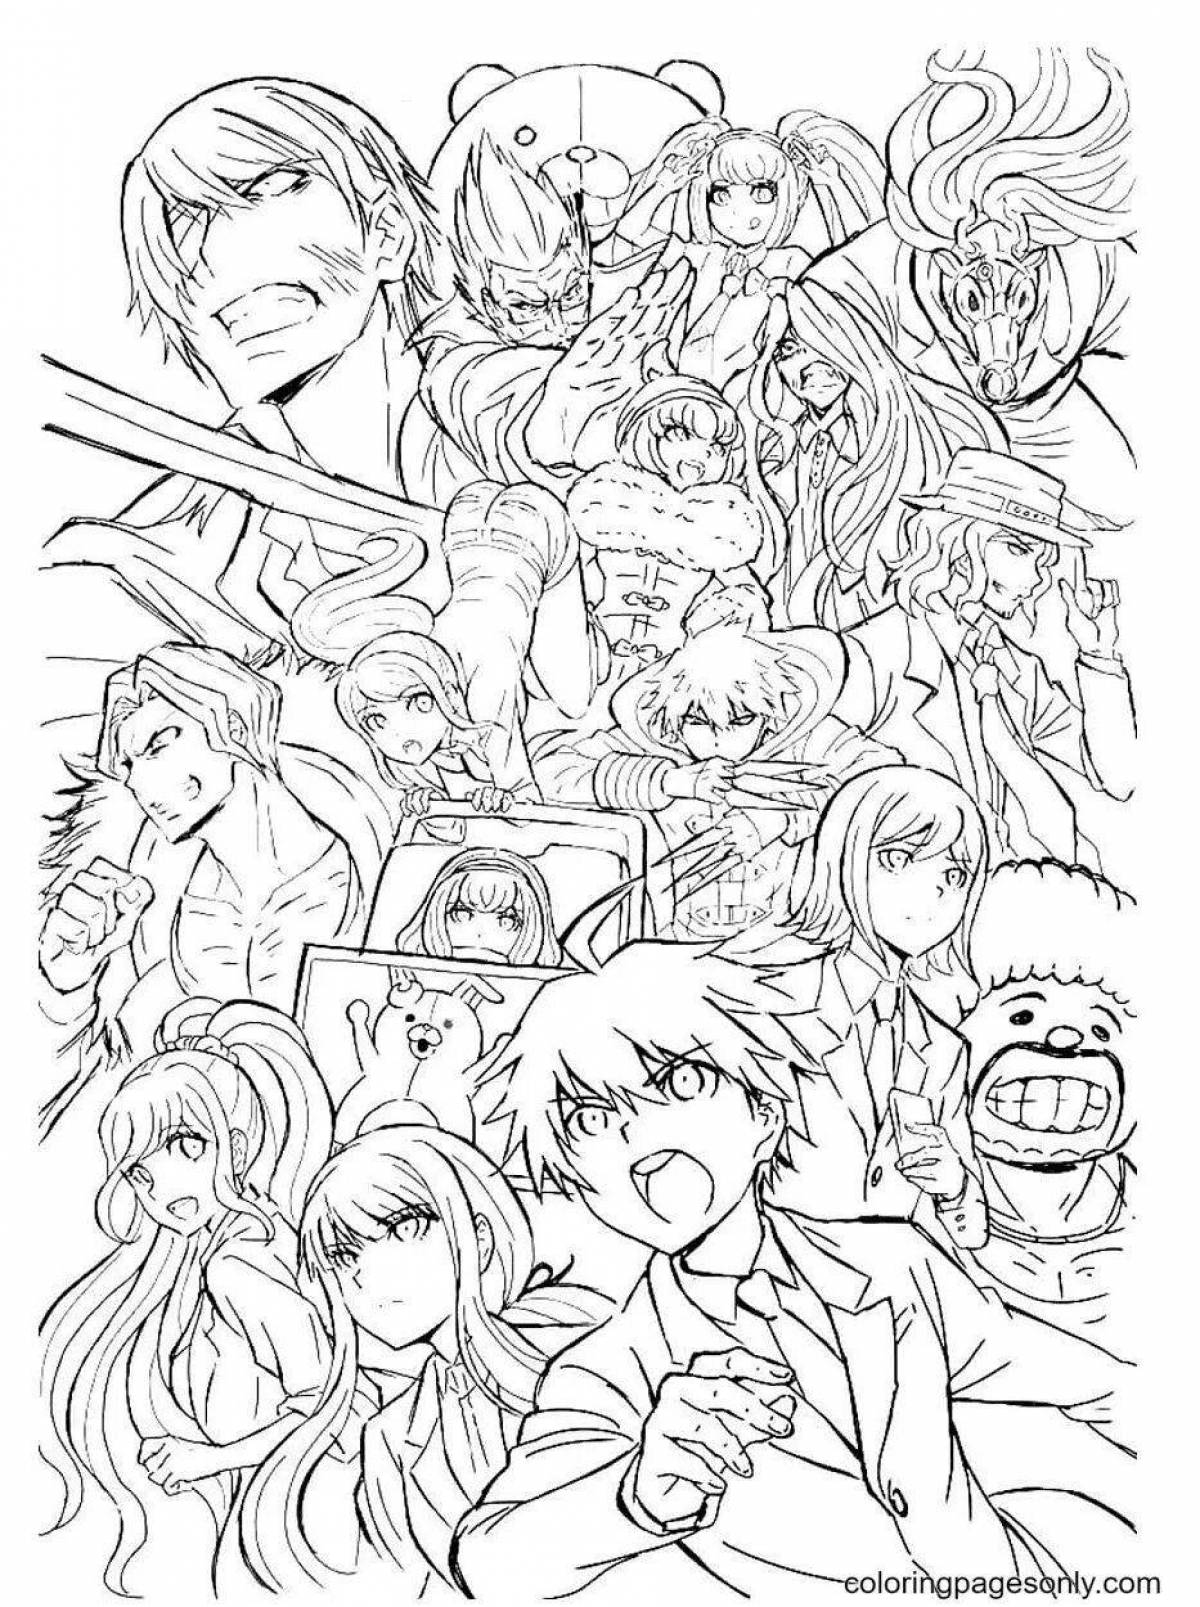 Amazing anime comic coloring page